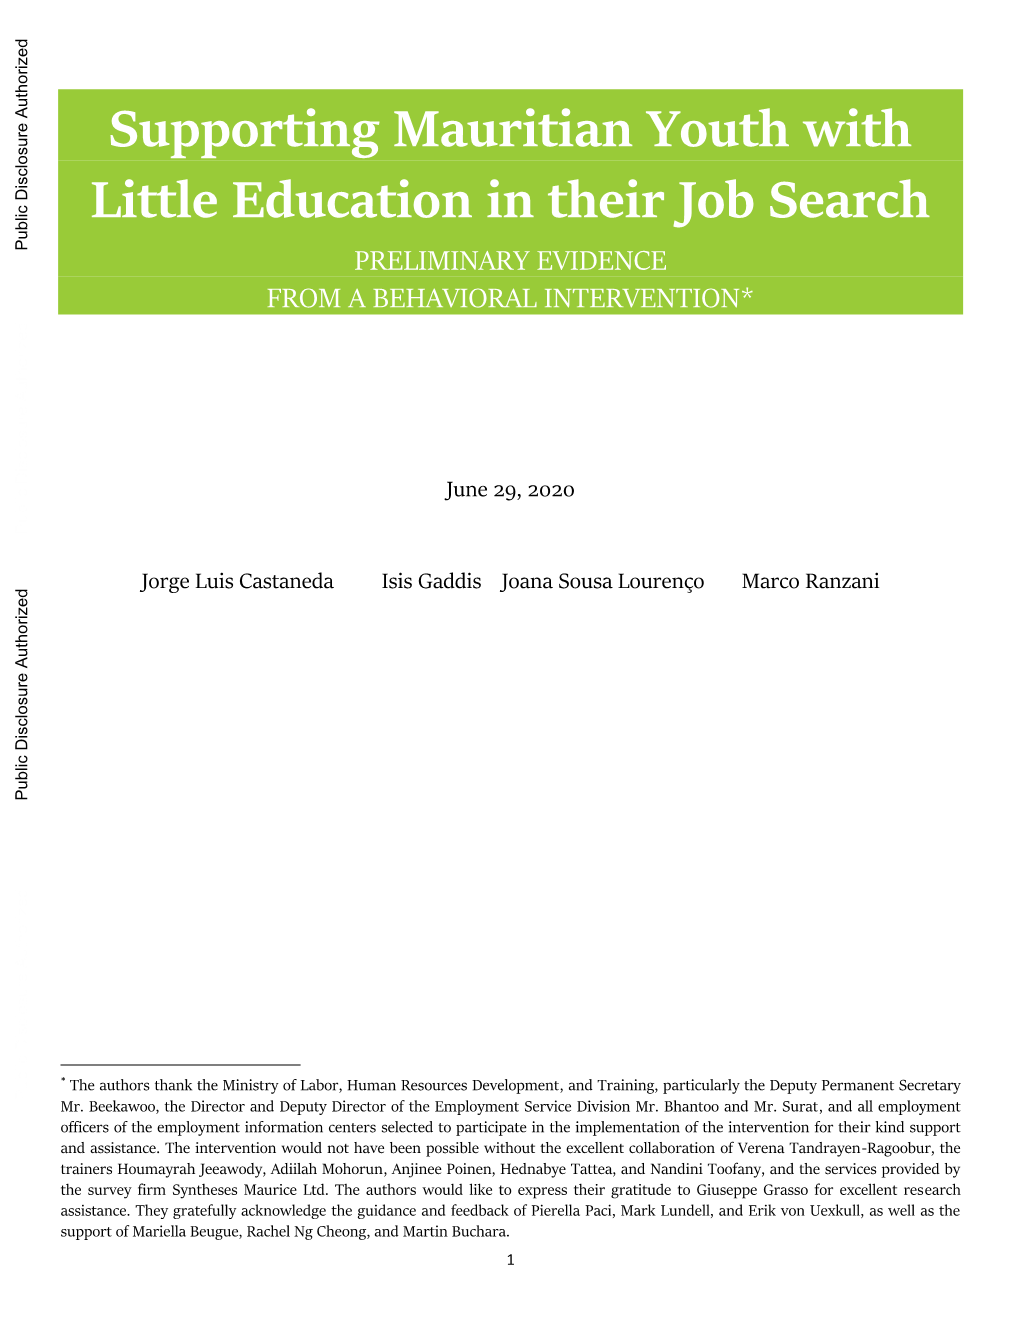 Supporting Mauritian Youth with Little Education in Their Job Search Public Disclosure Authorized PRELIMINARY EVIDENCE from a BEHAVIORAL INTERVENTION*